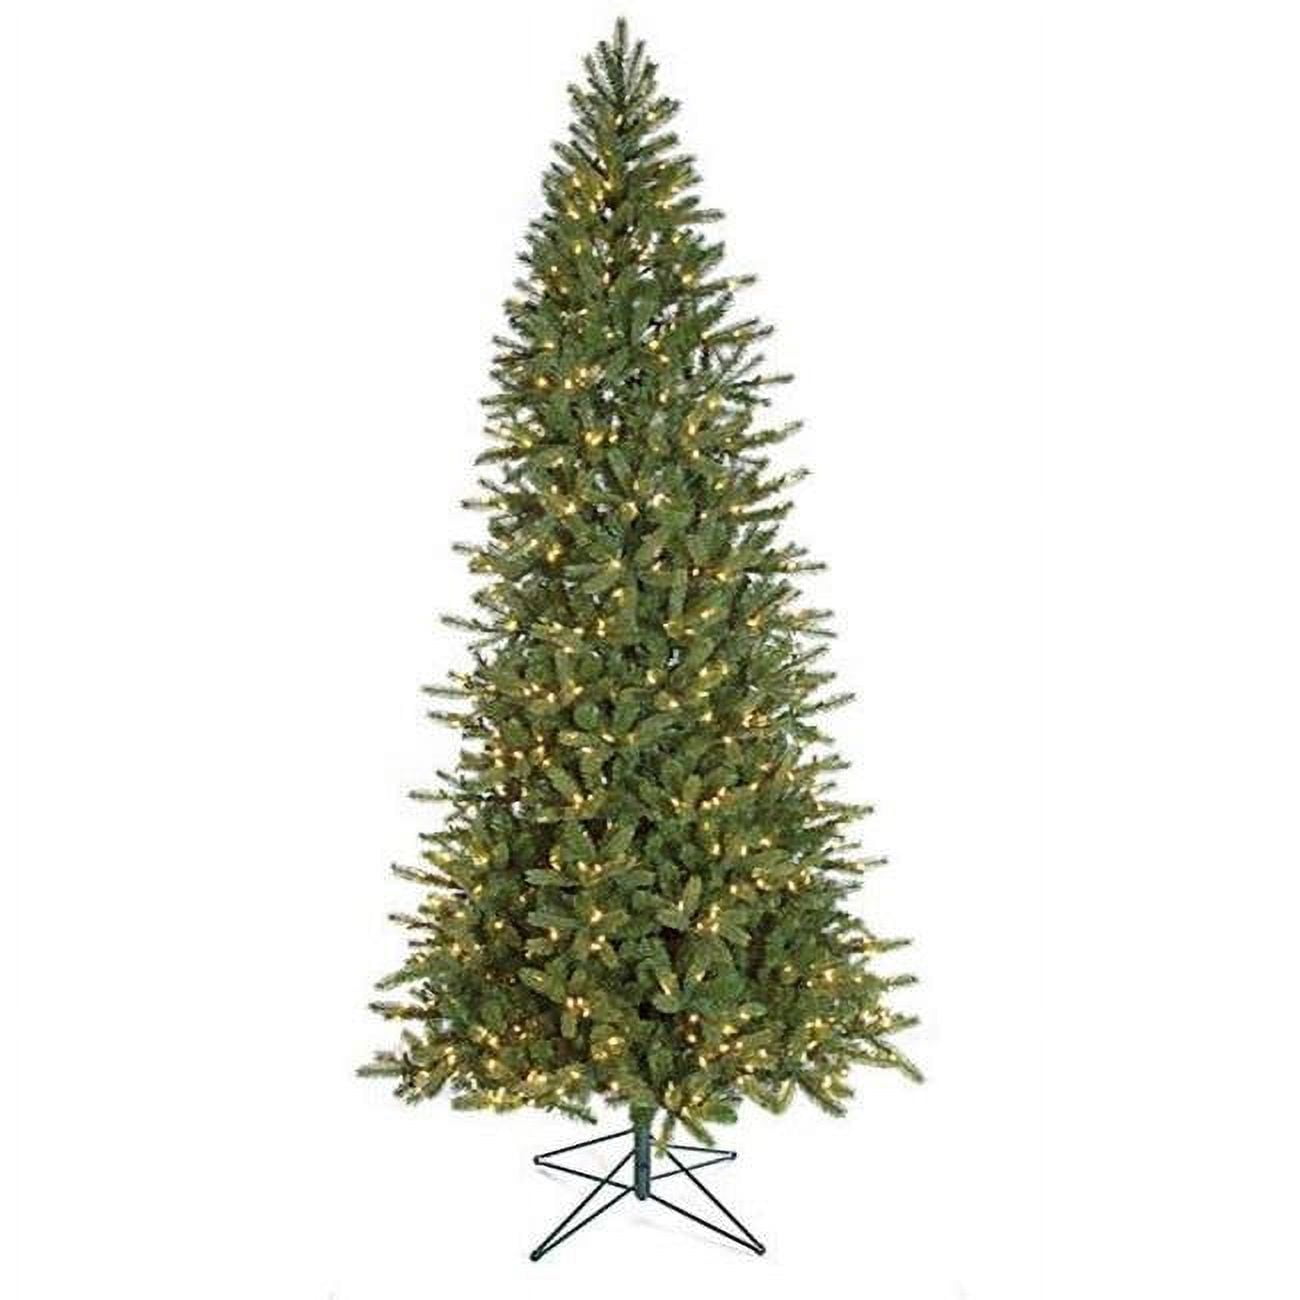 Picture of Autograph Foliages C-120110-1 9 ft. Slim Spruce Tree, Green